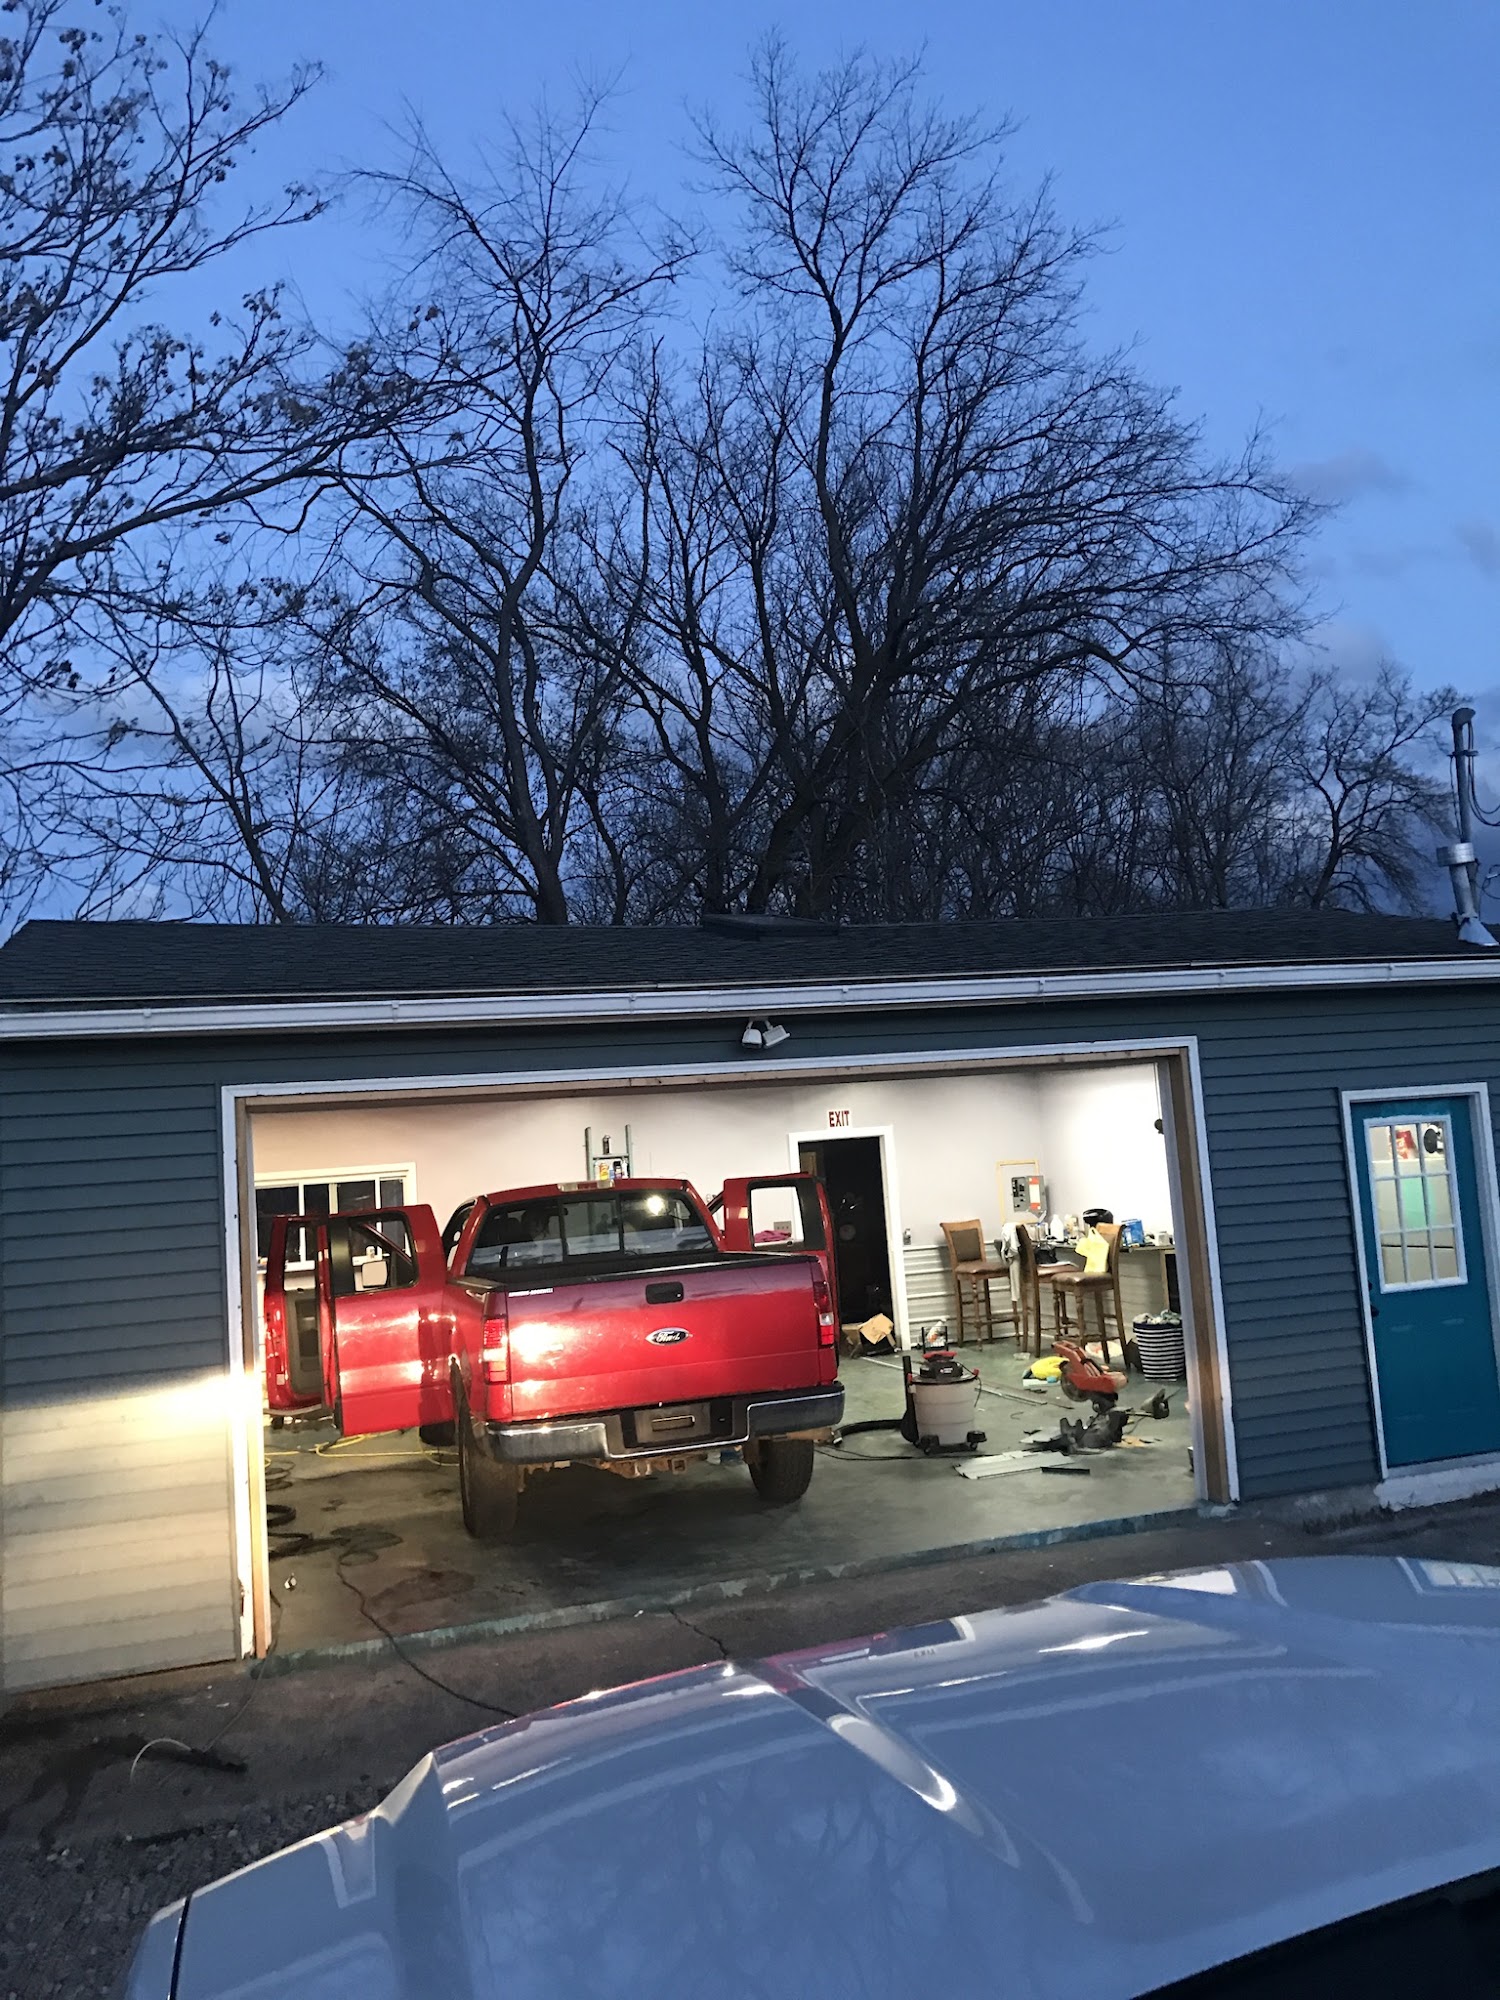 Cooks Auto Detailing 1902 Grand Central Ave, Horseheads New York 14845